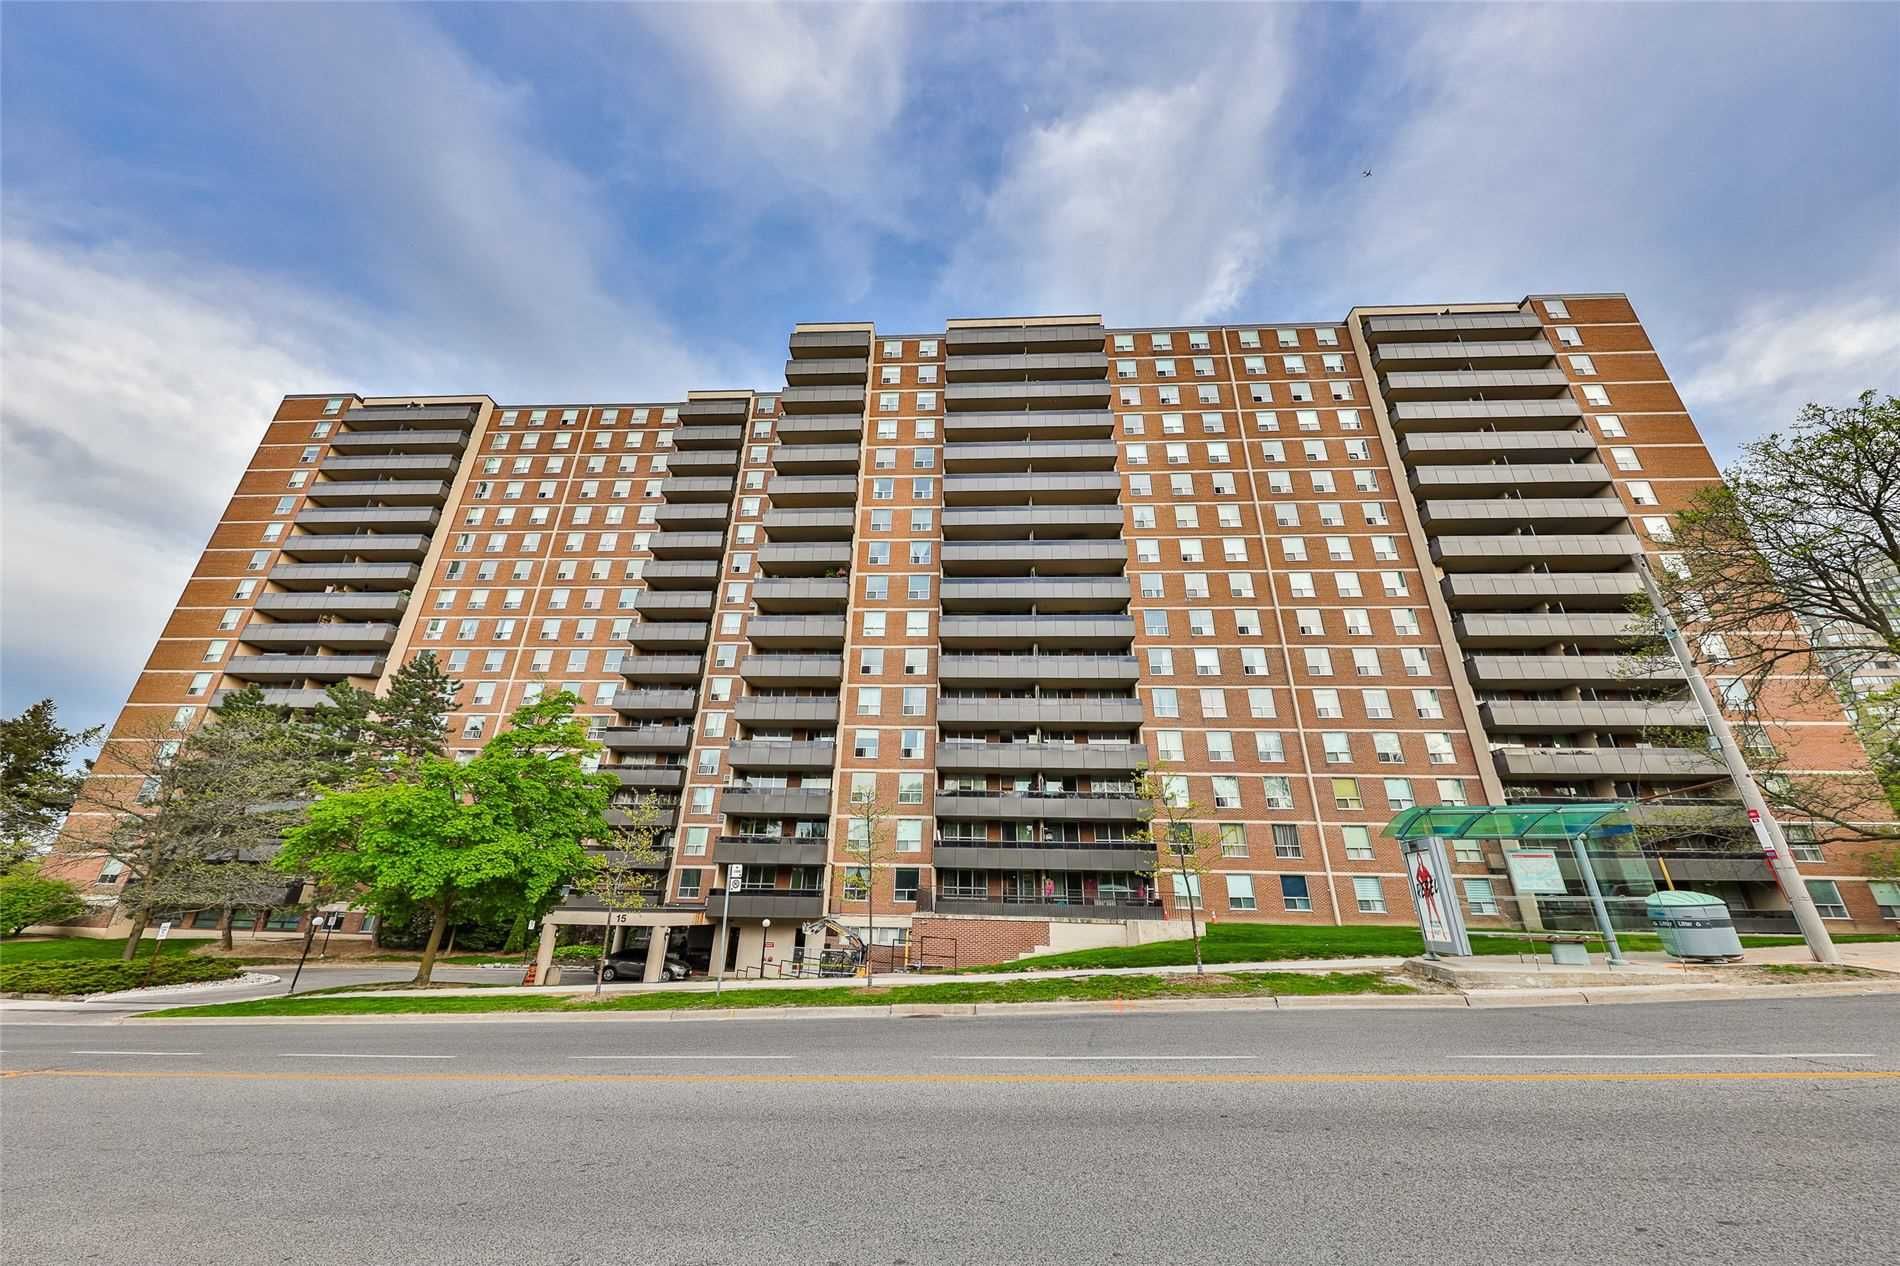 15 La Rose Ave. This condo at Humber Hill Towers Condos is located in  Etobicoke, Toronto - image #1 of 2 by Strata.ca